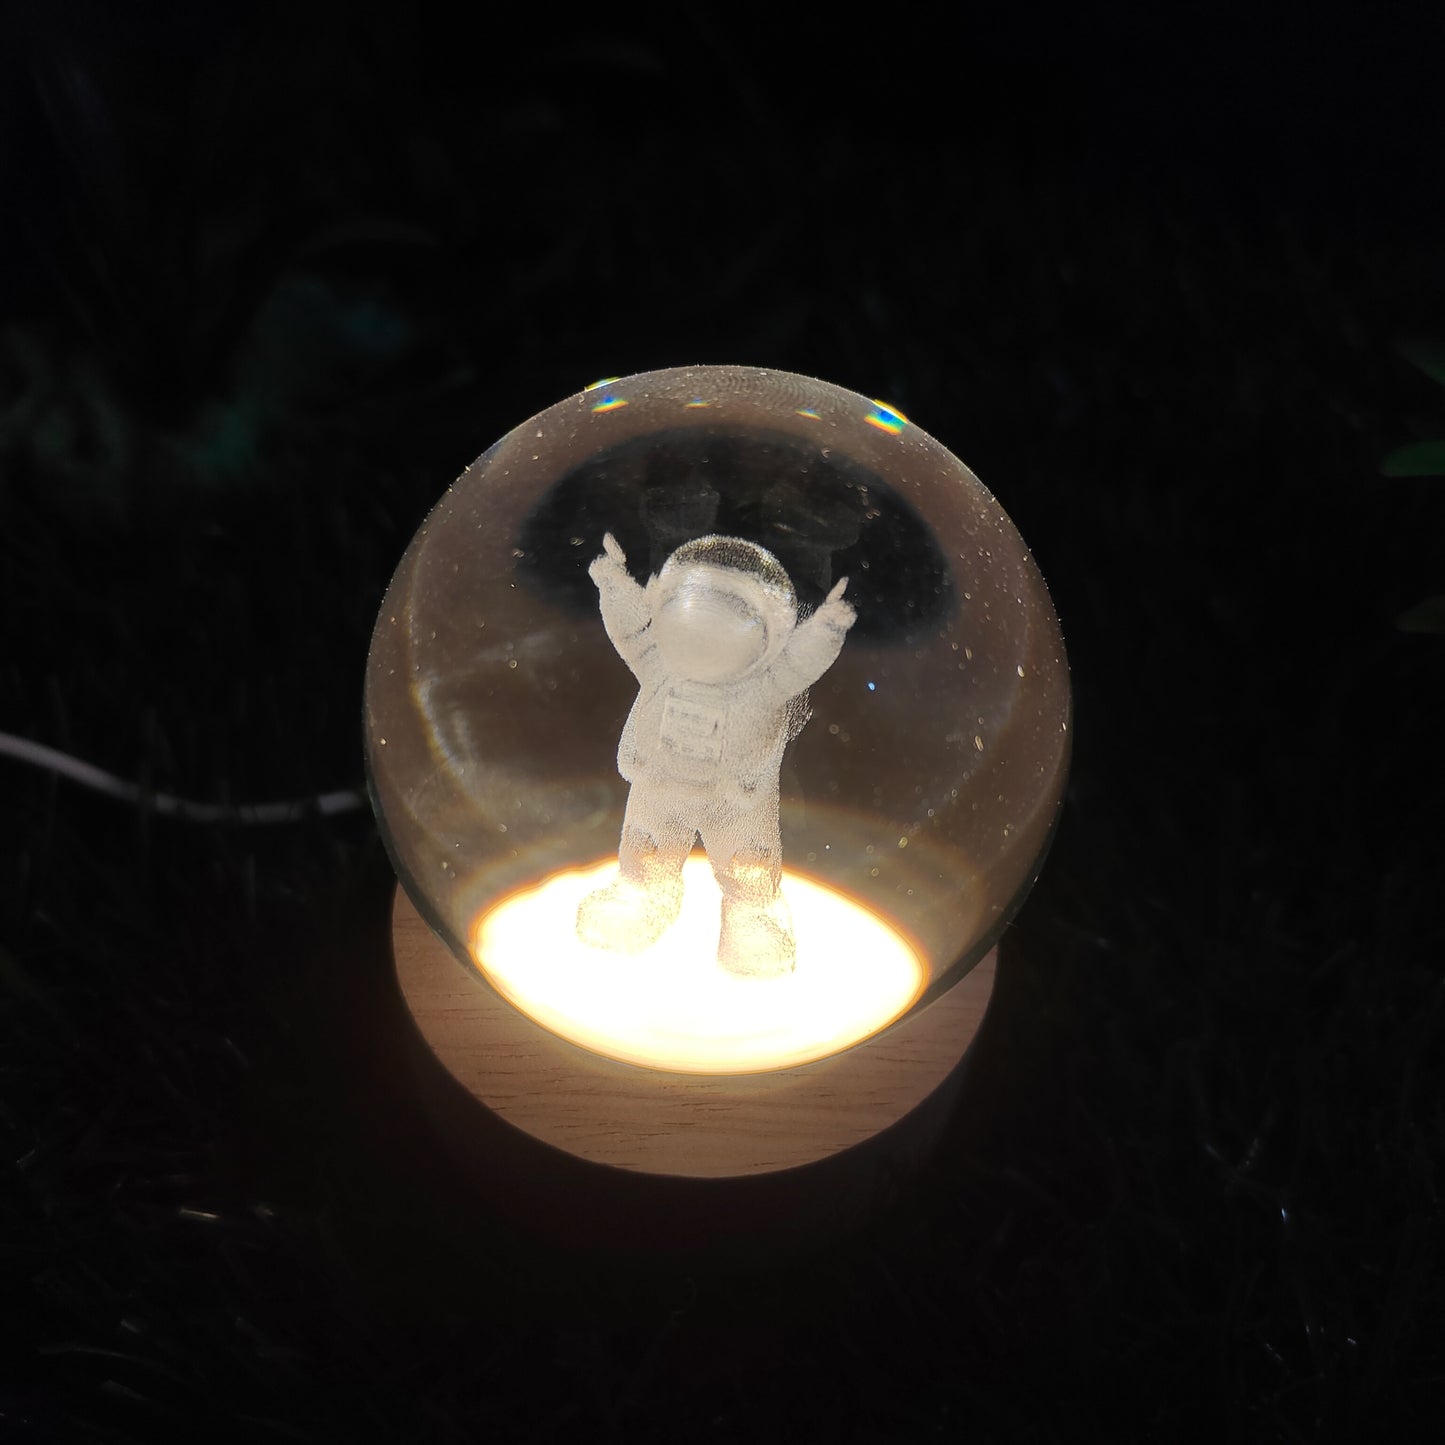 3D Astronaut Crystal Ball Lamp For Home / Office / Bedroom